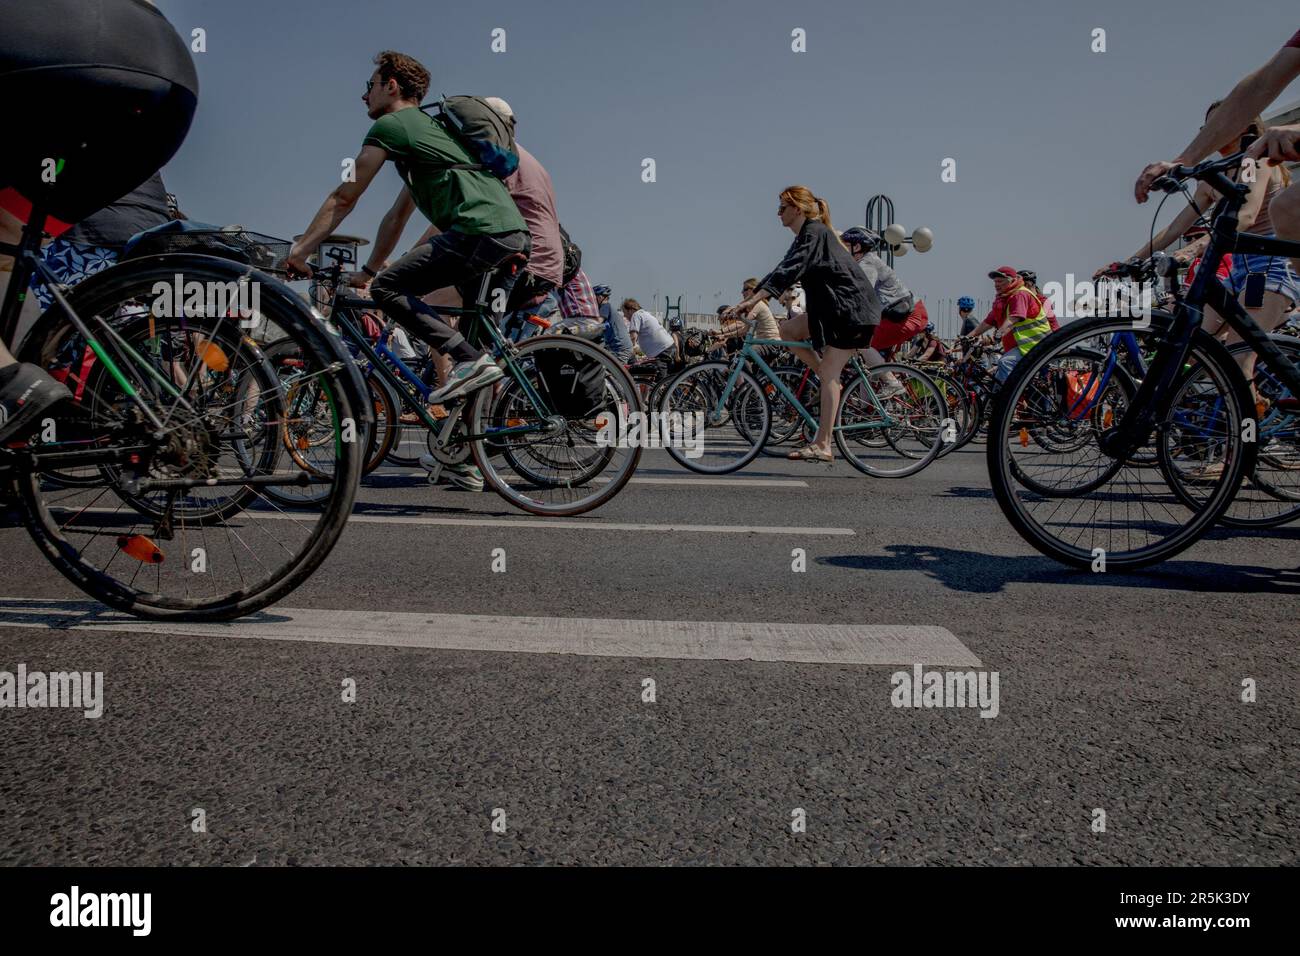 Thousands of cyclists participated in the annual bike protest, the Sternfahrt, in Berlin on June 4, 2023. Participants called for protected bike lanes and safer streets around schools. Numerous roads in and around Berlin were closed to car traffic to accommodate the event, including sections of freeways. The action caused significant disruptions for motorists throughout the city. All routes converged at the Victory Column in Berlin's Tiergarten Park. Road closures were also implemented on the A113/A100 and A115 (AVUS) freeways. The General German Bicycle Club (ADFC) estimated tens of thousands Stock Photo